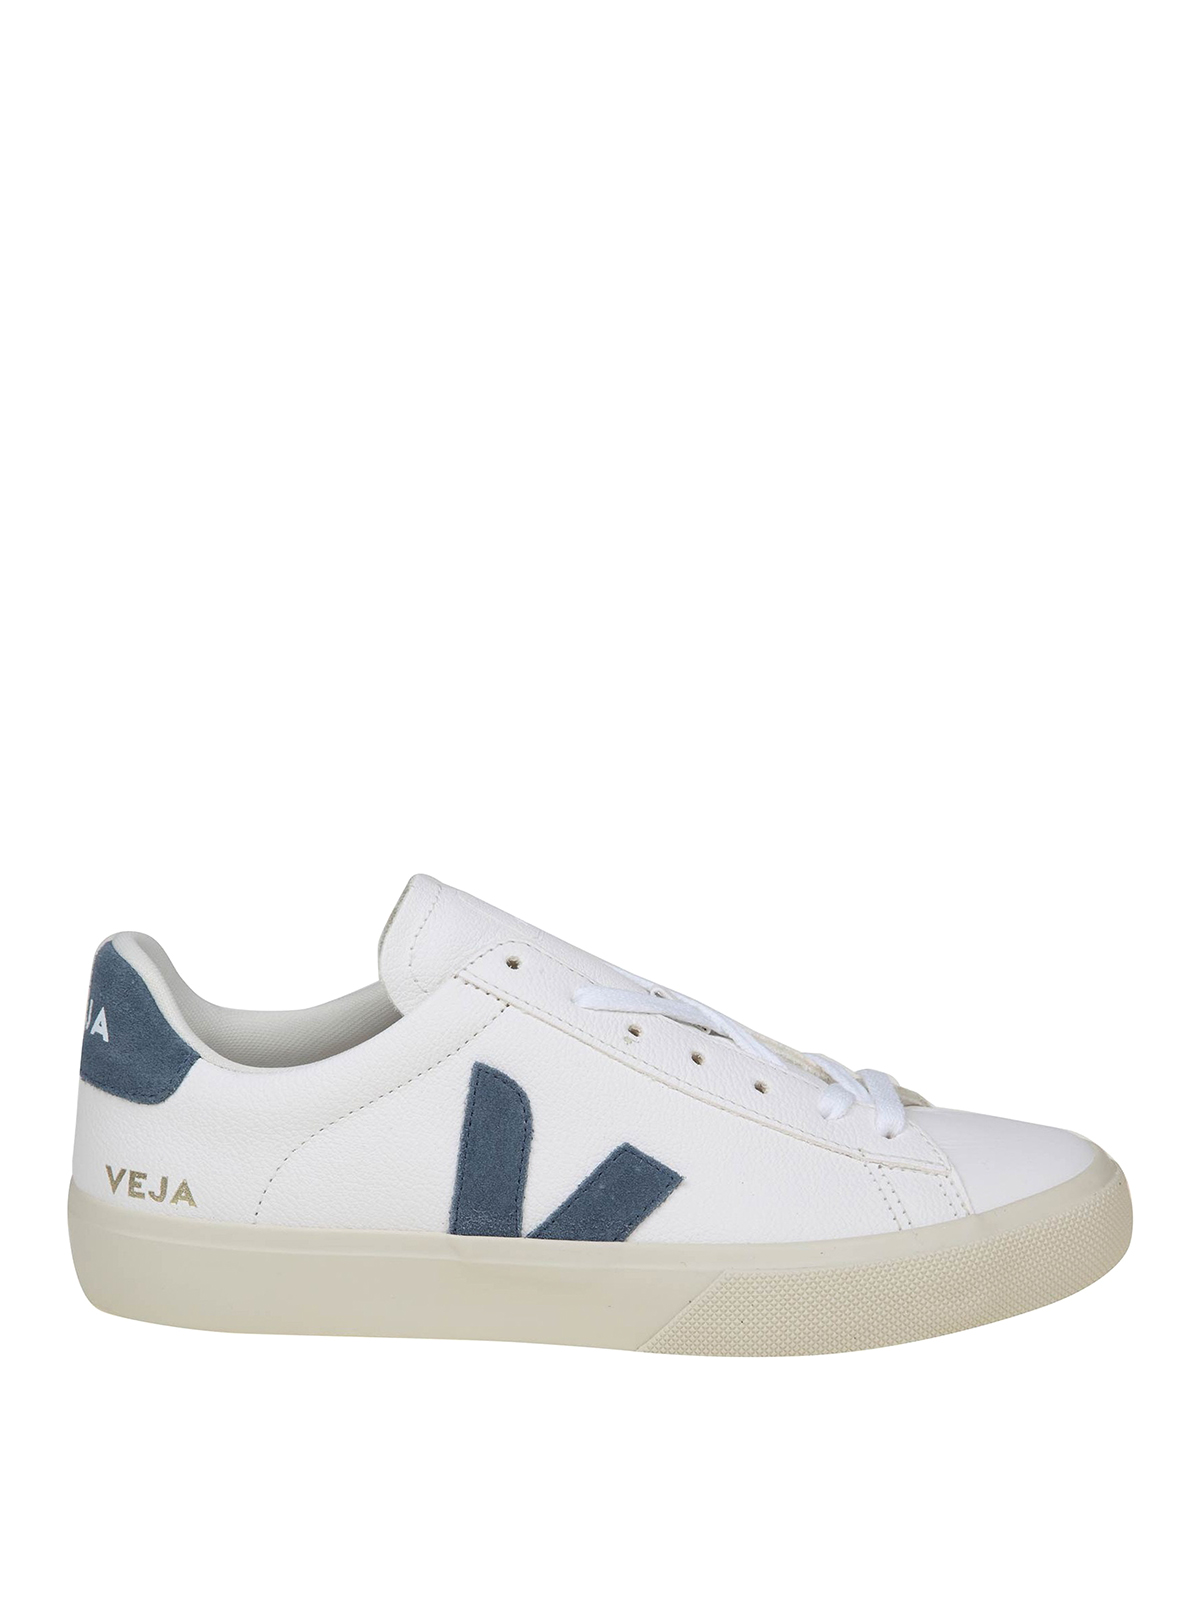 Trainers Veja - Veja field white and blue color - CP0503121 | iKRIX.com